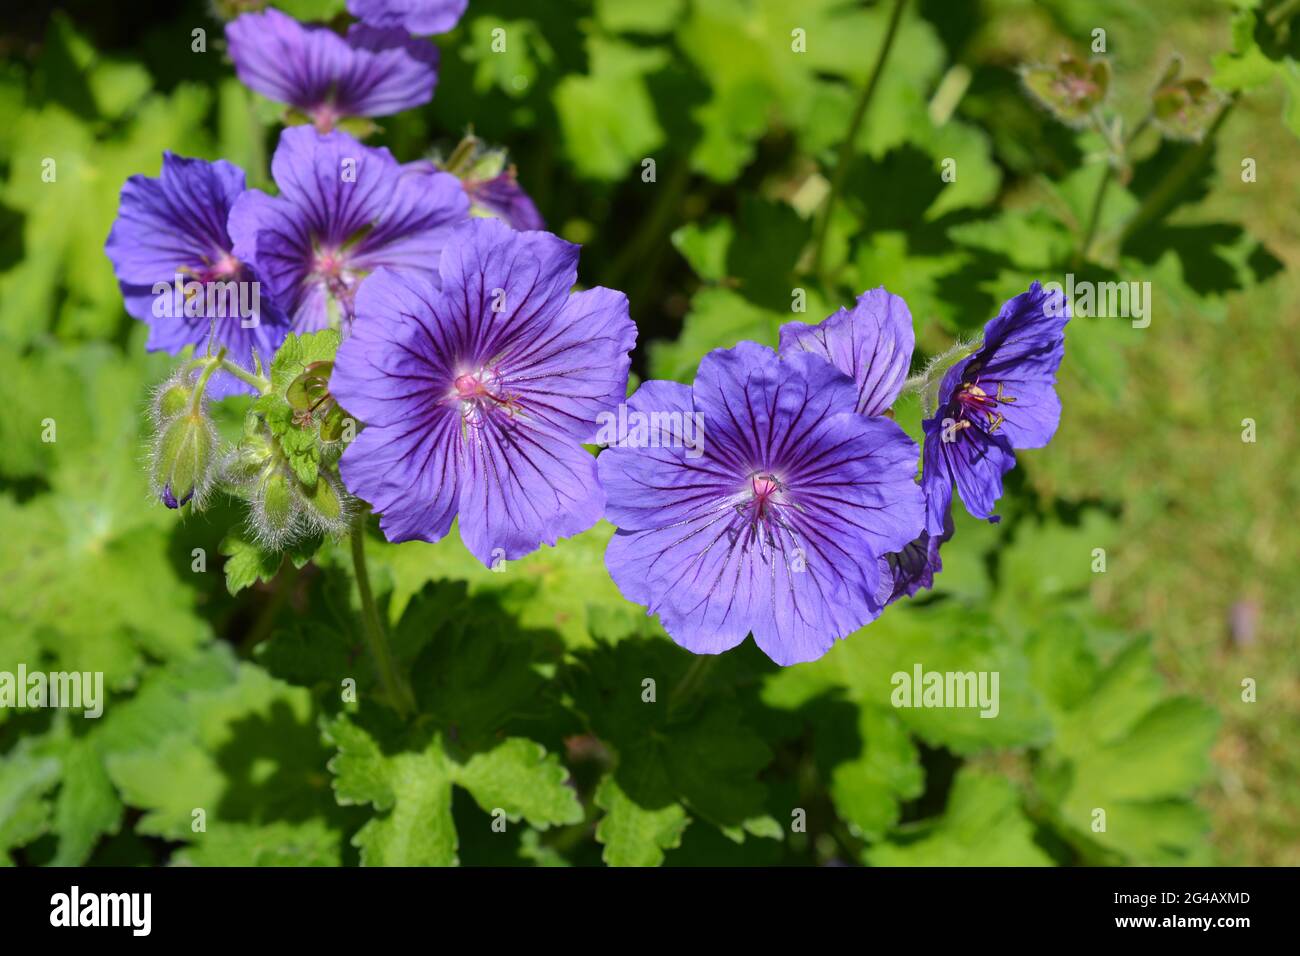 Hardy geranium also known as Cranesbill magnificum Rosemoor, plant detail showing purple flowers, buds and leaves Stock Photo